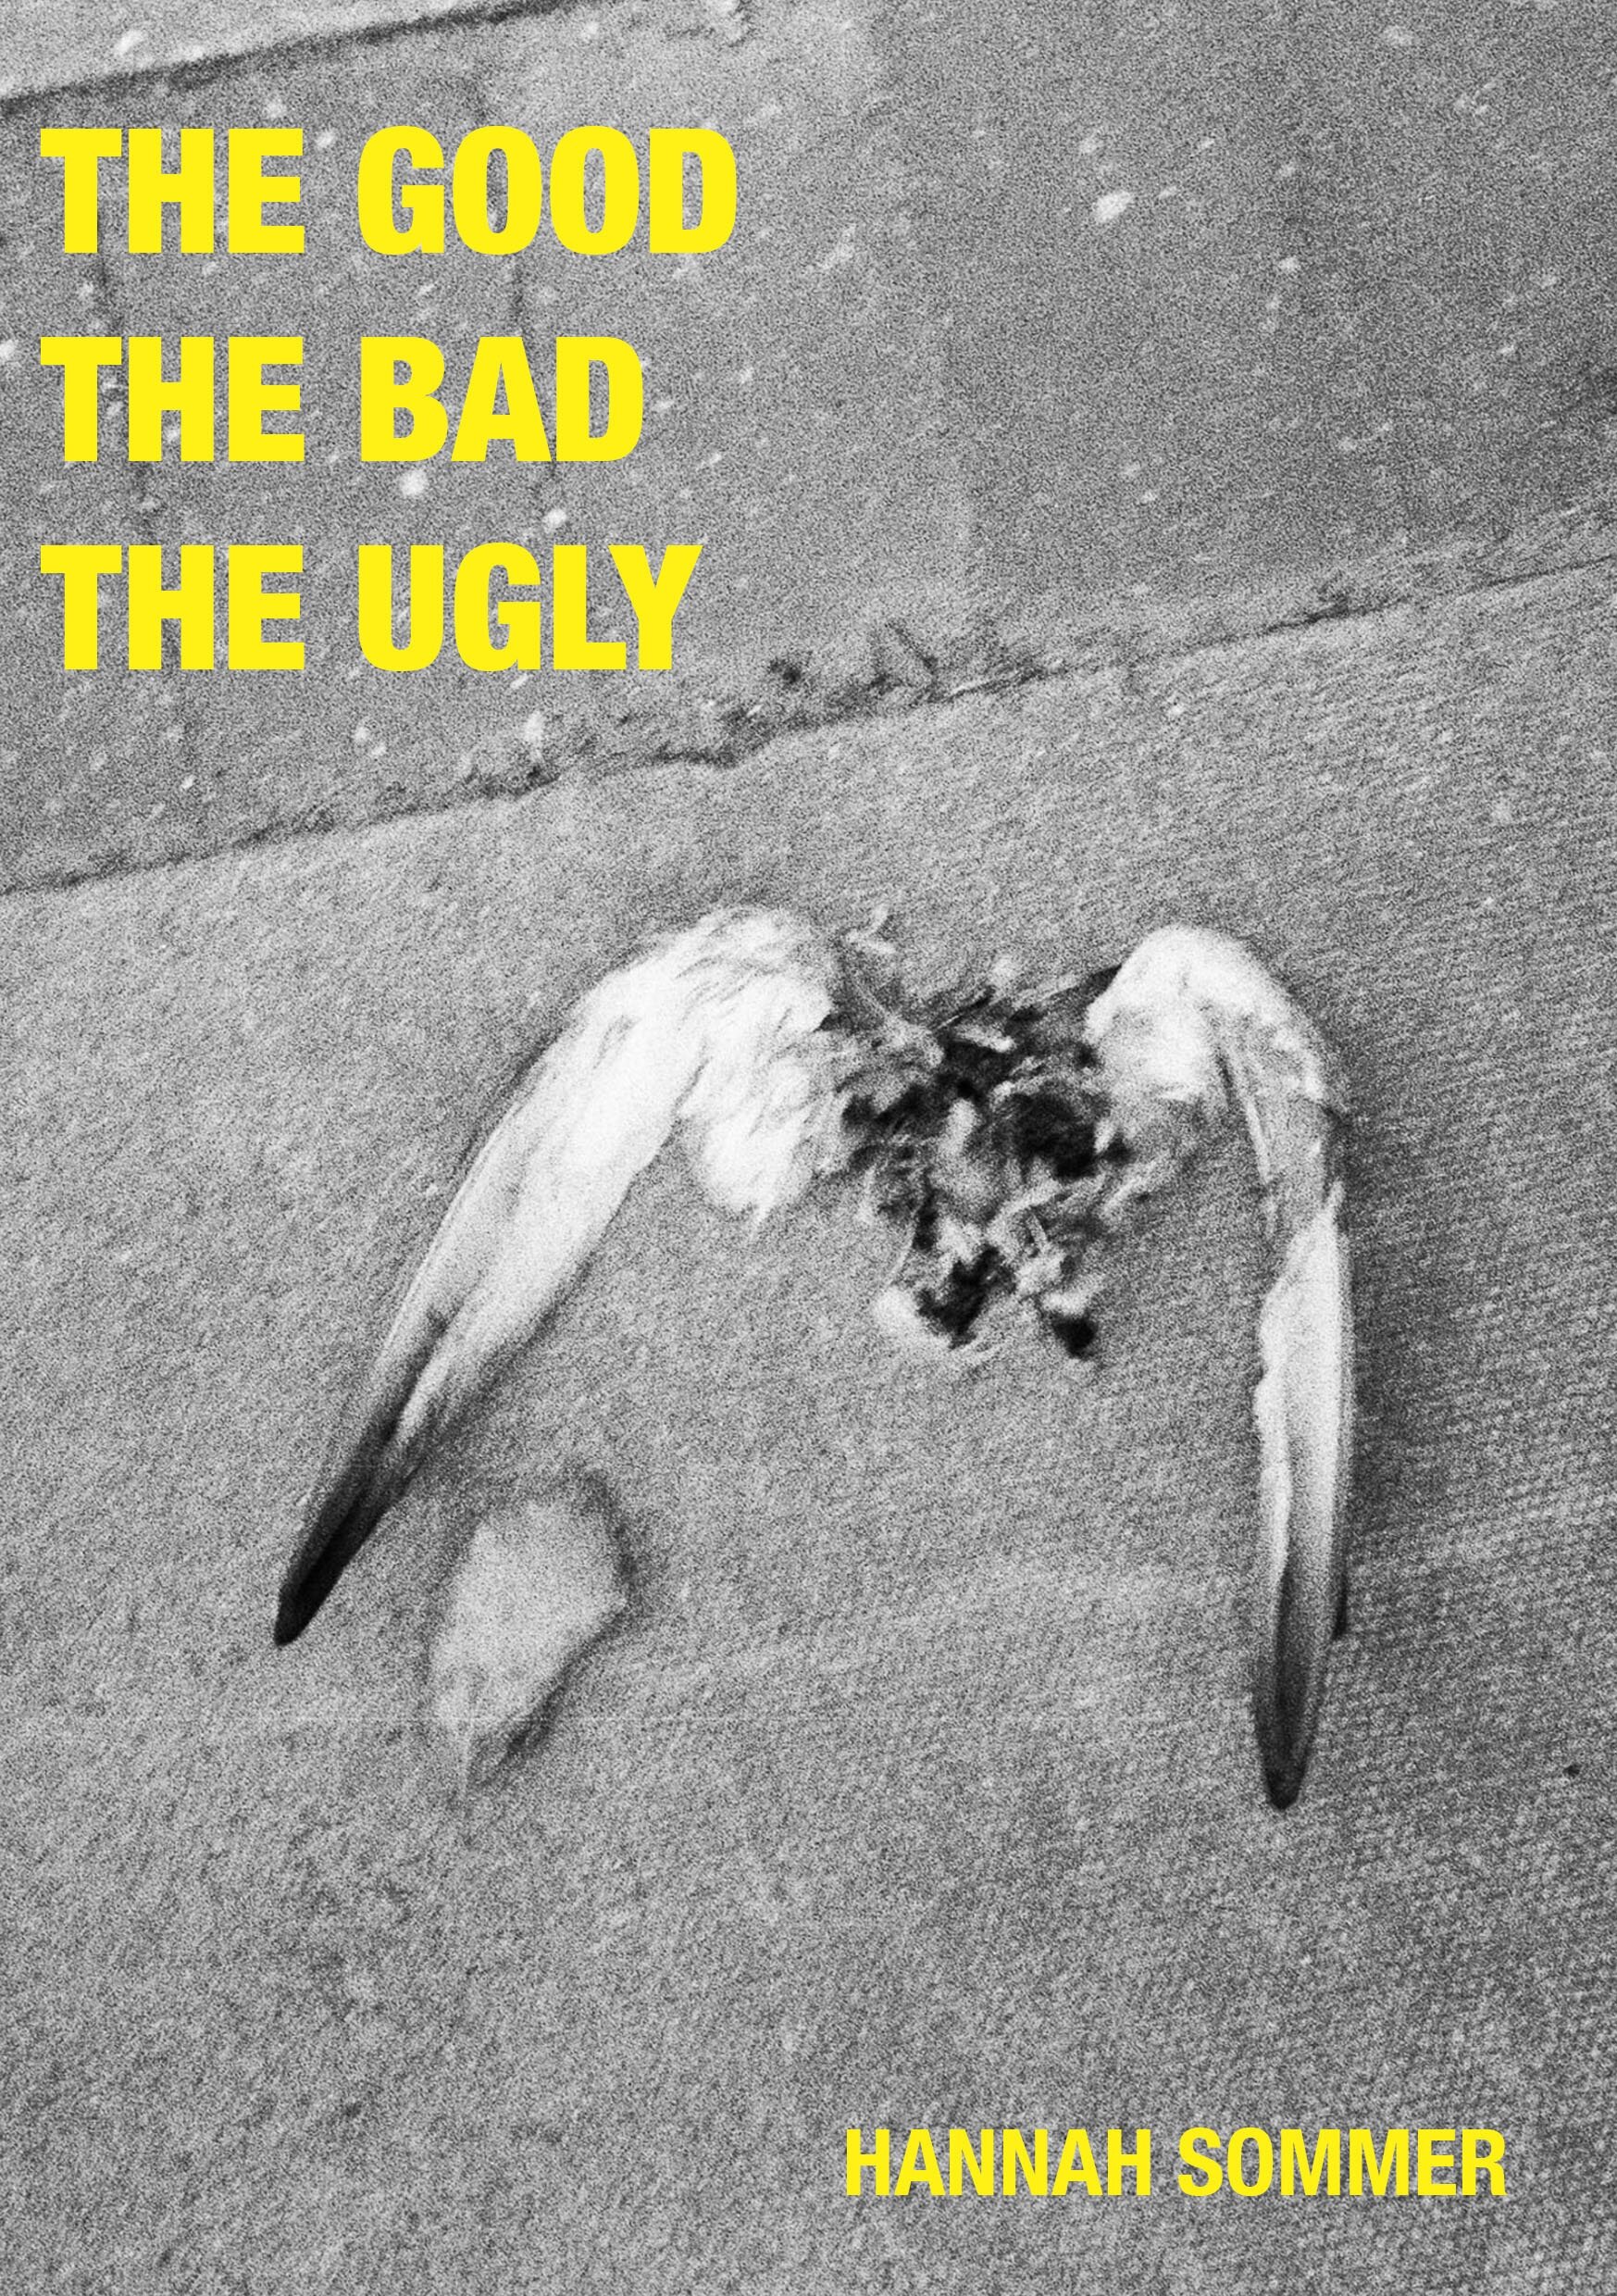 The Good, The Bad, The Ugly. Zine. 2020. 